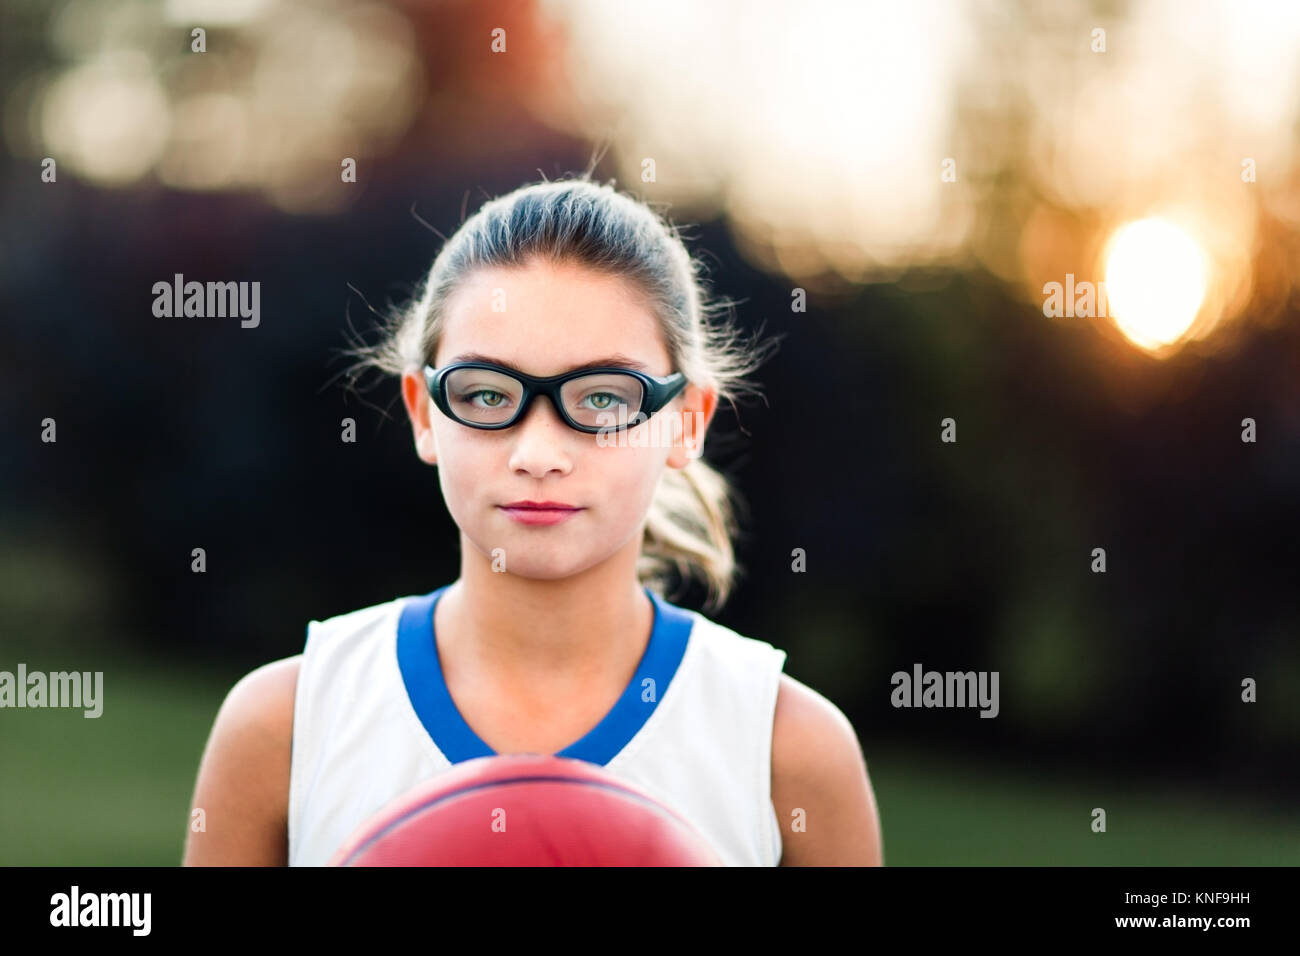 Portrait of girl wearing sports goggles holding basketball Stock Photo